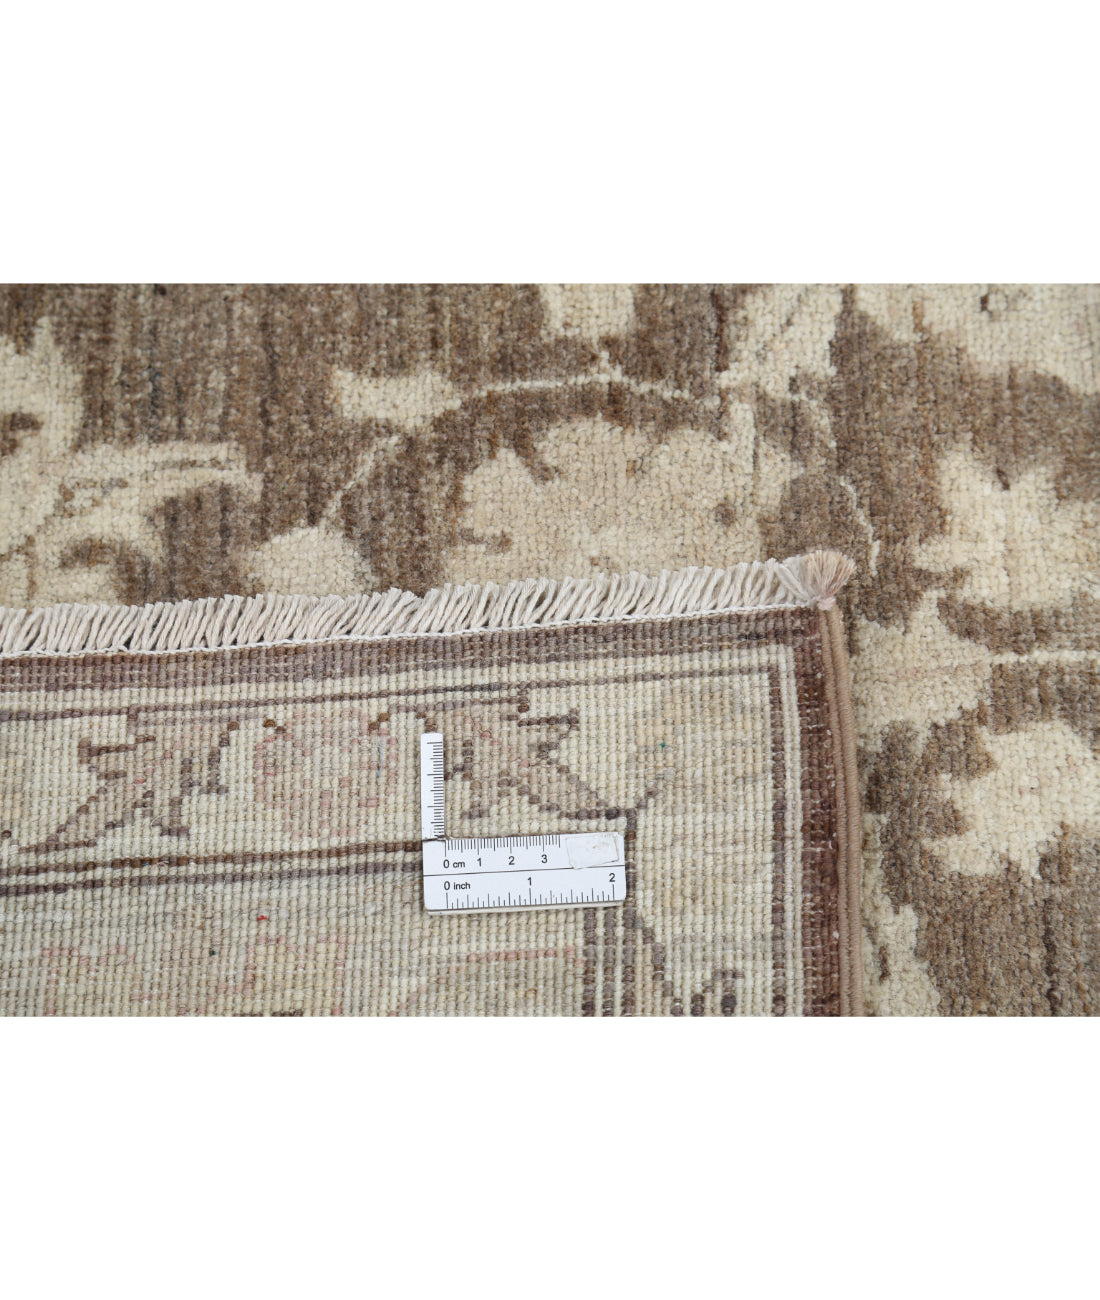 Hand Knotted Serenity Wool Rug - 7'11'' x 10'1'' 7'11'' x 10'1'' (238 X 303) / Brown / Ivory